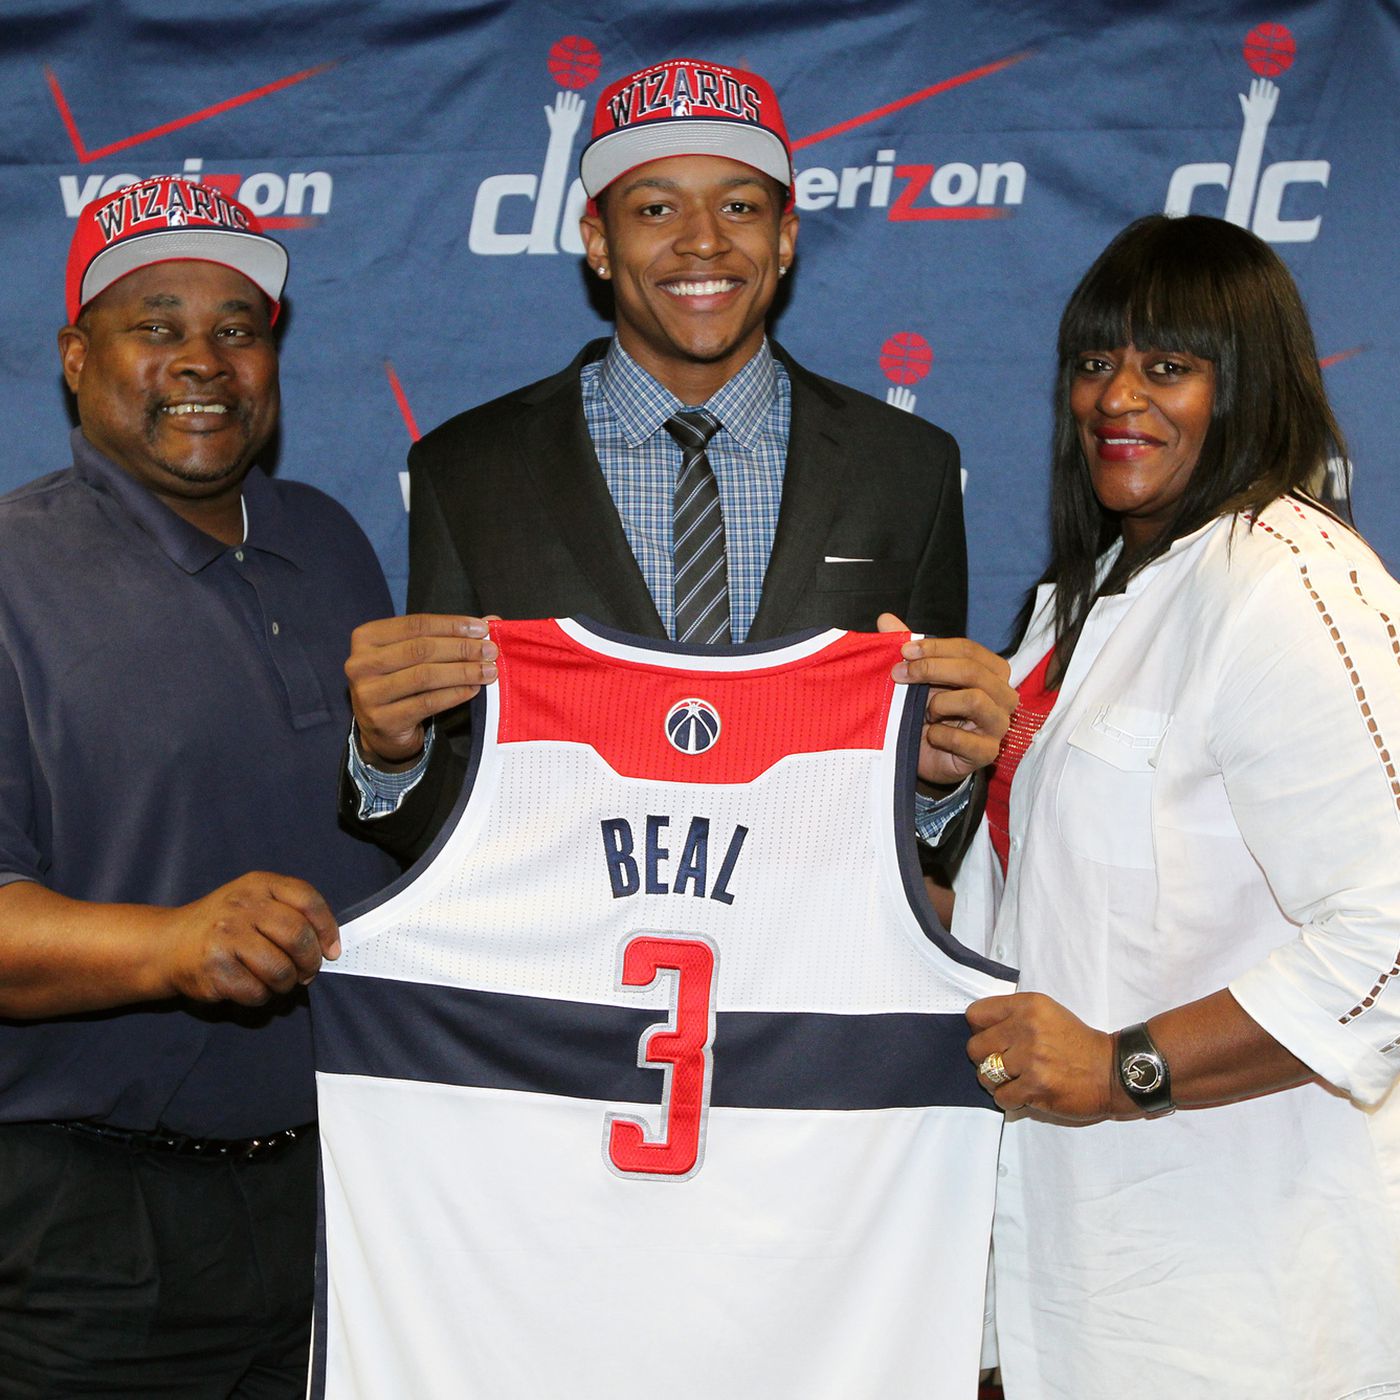 Bradley Beal with his father Bobby Beal and Mother Besta Beal revealing his number 3 shirt for the Washington Wizards